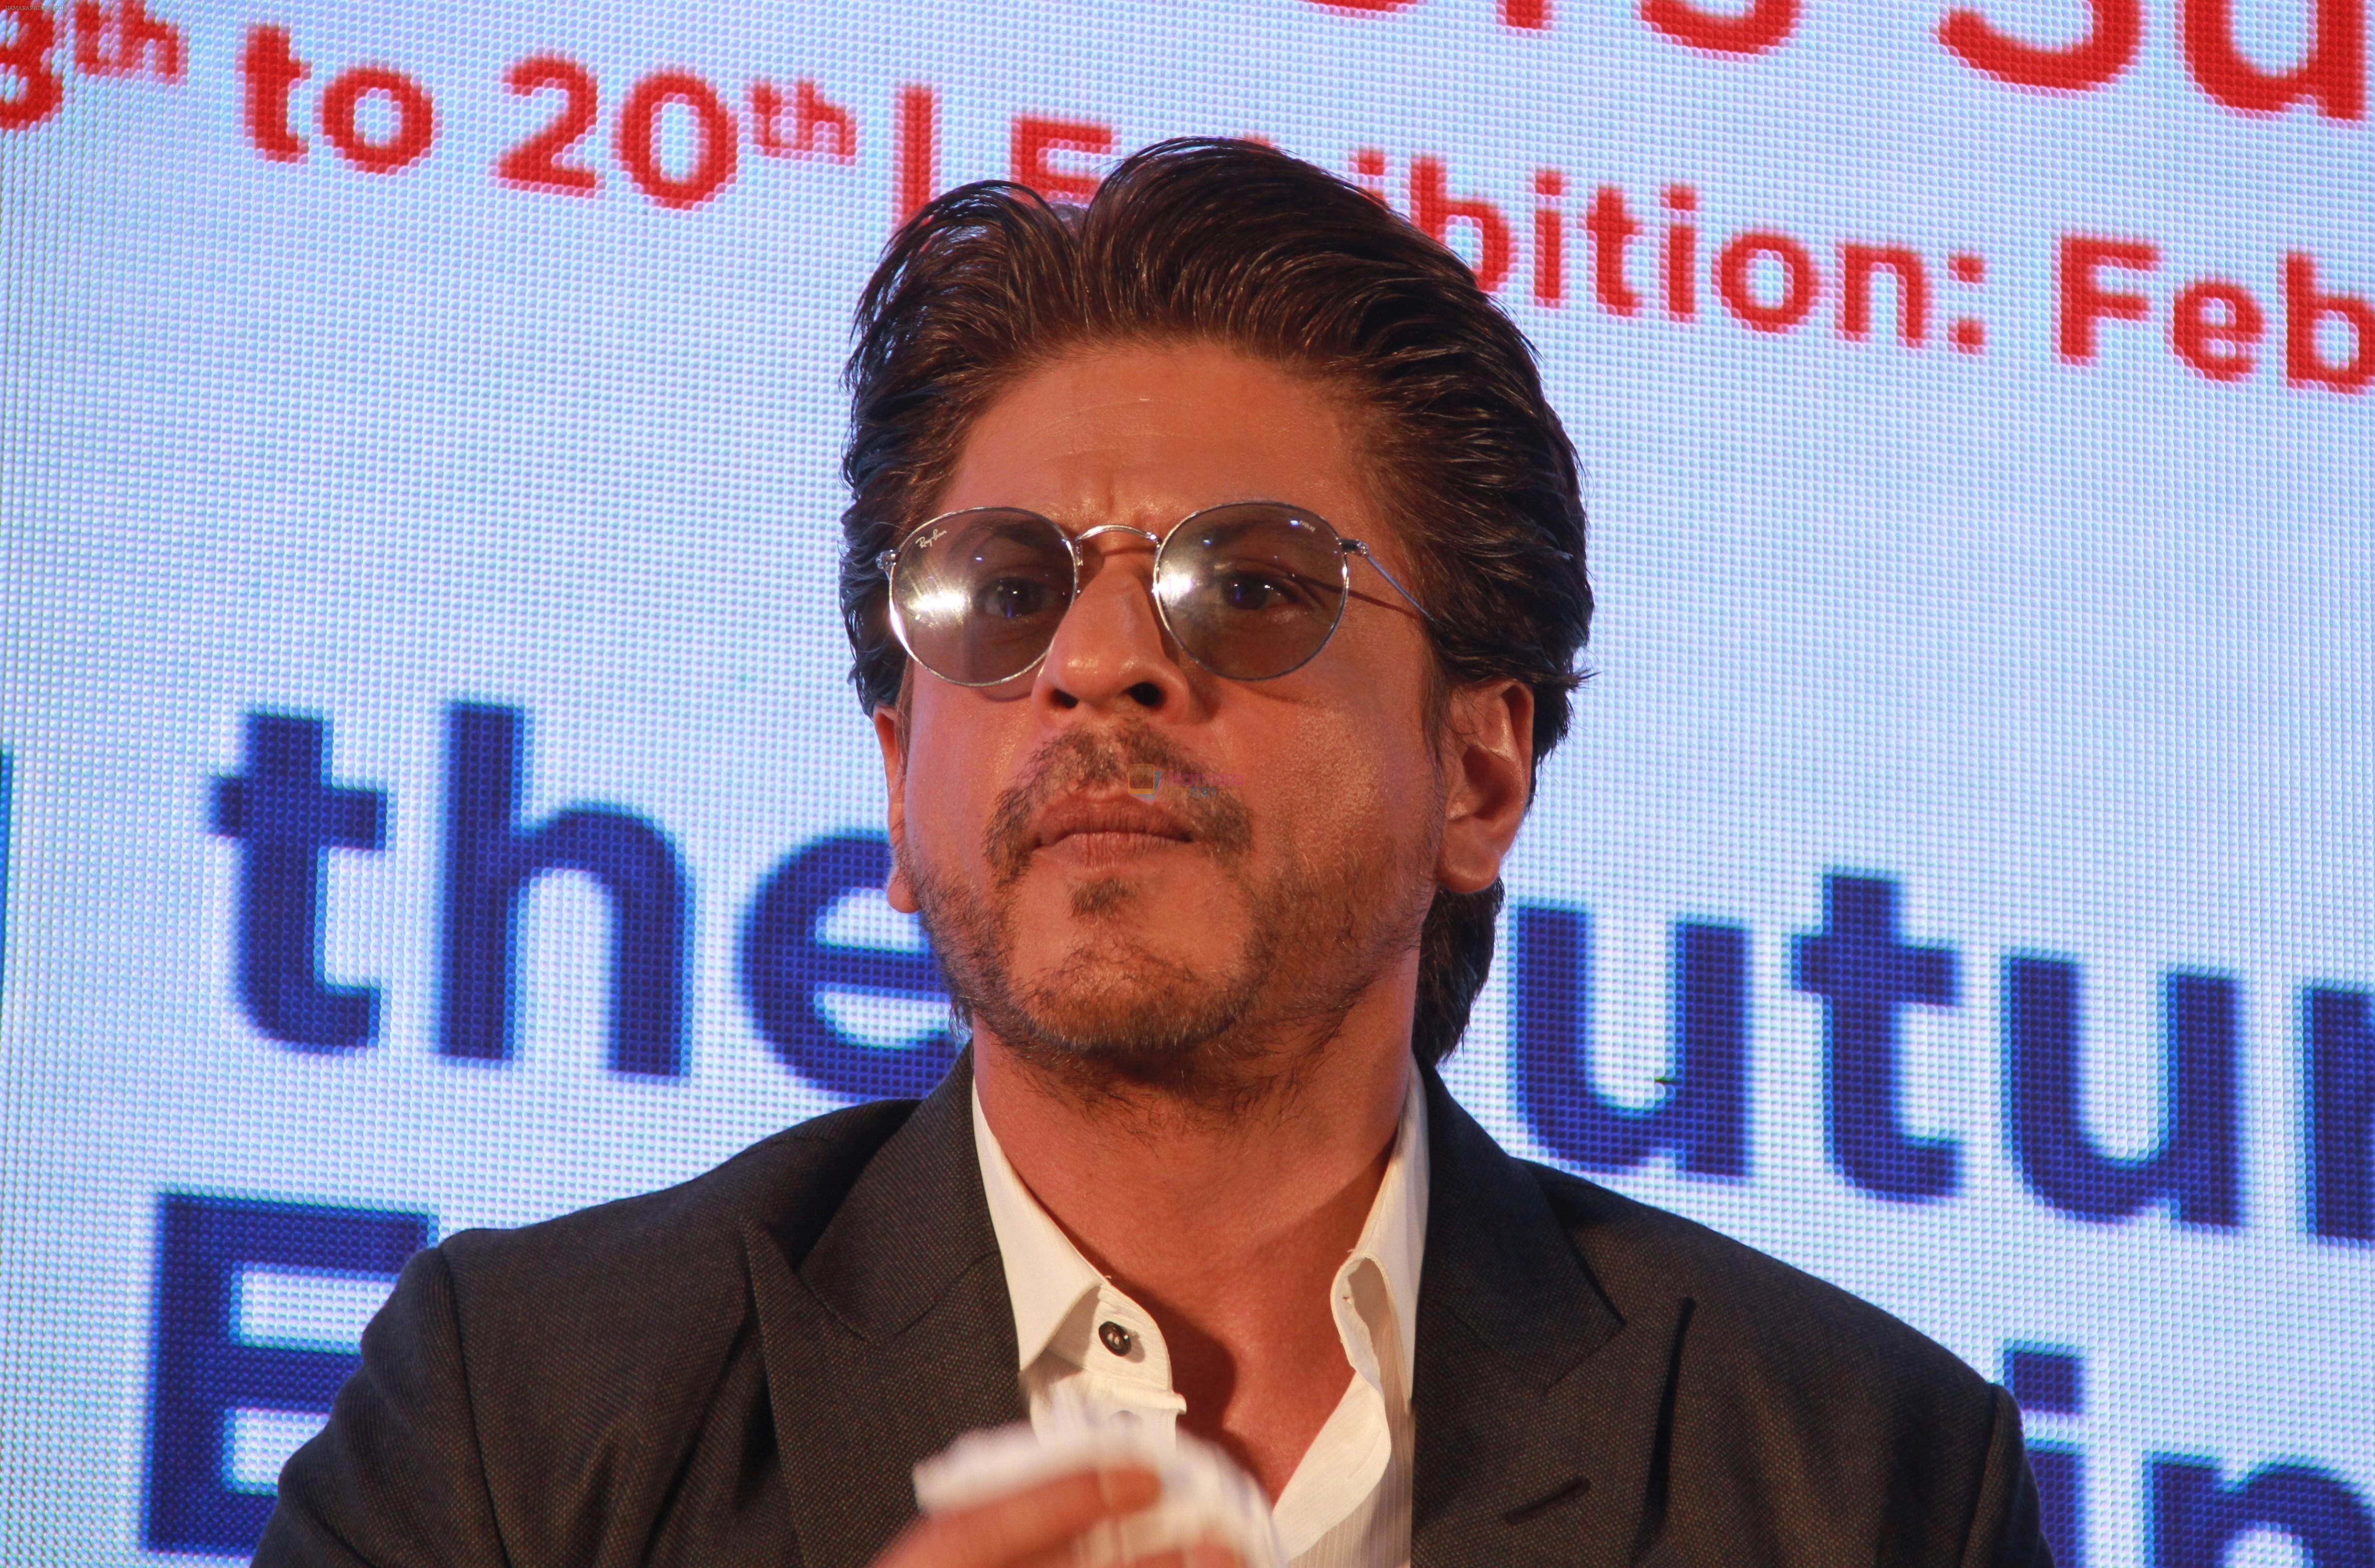 Shahrukh Khan attends the Media shaping the future & entertainment in Magnetic Maharshtra in bkc Mumbai on 20th Feb 2018